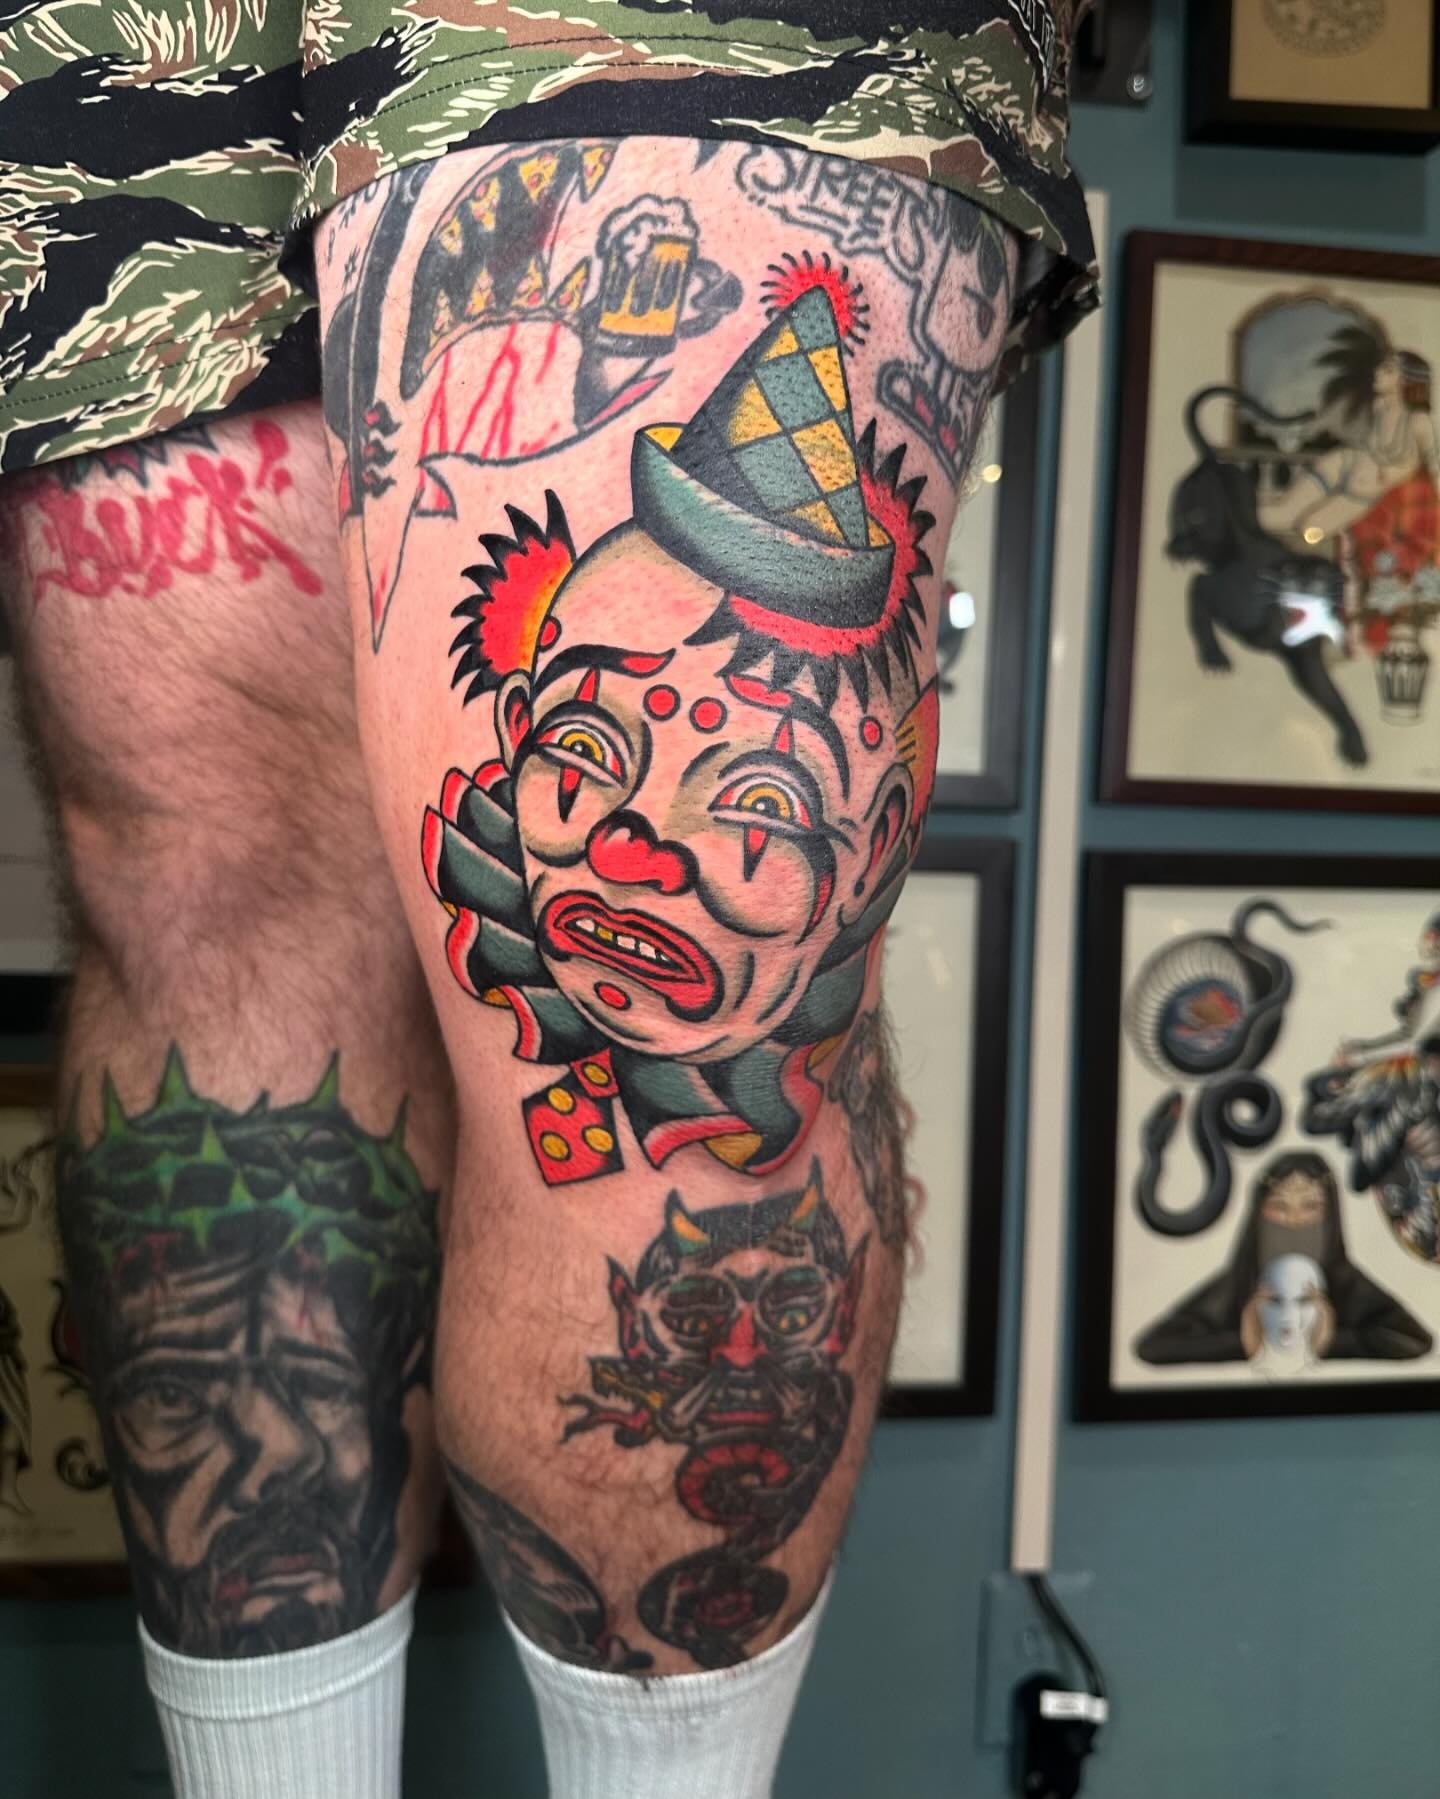 Sad clown knee plus some extras. Thanks to everyone that gets tattooed! FLASH DAY THIS SATURDAY 5/4! No appointment necessary just walk in 12-8 pm. Also I have two appointments available in Amsterdam 5/23. Hope everyone has a great week!❤️